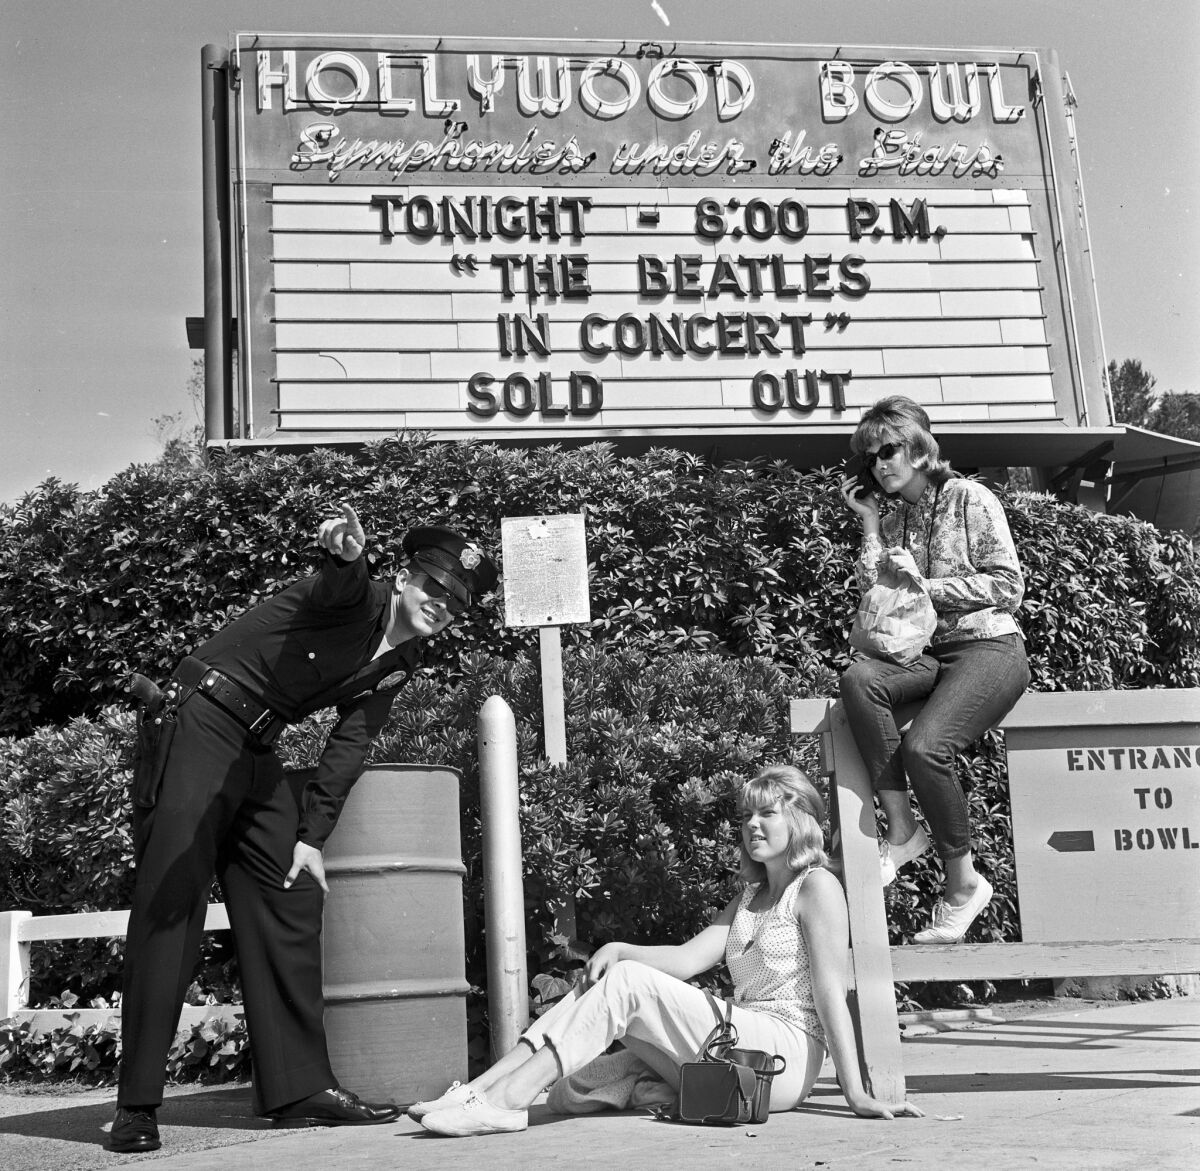 Fans await the arrival of the Beatles at the Hollywood Bowl for their concert Aug. 23, 1964.